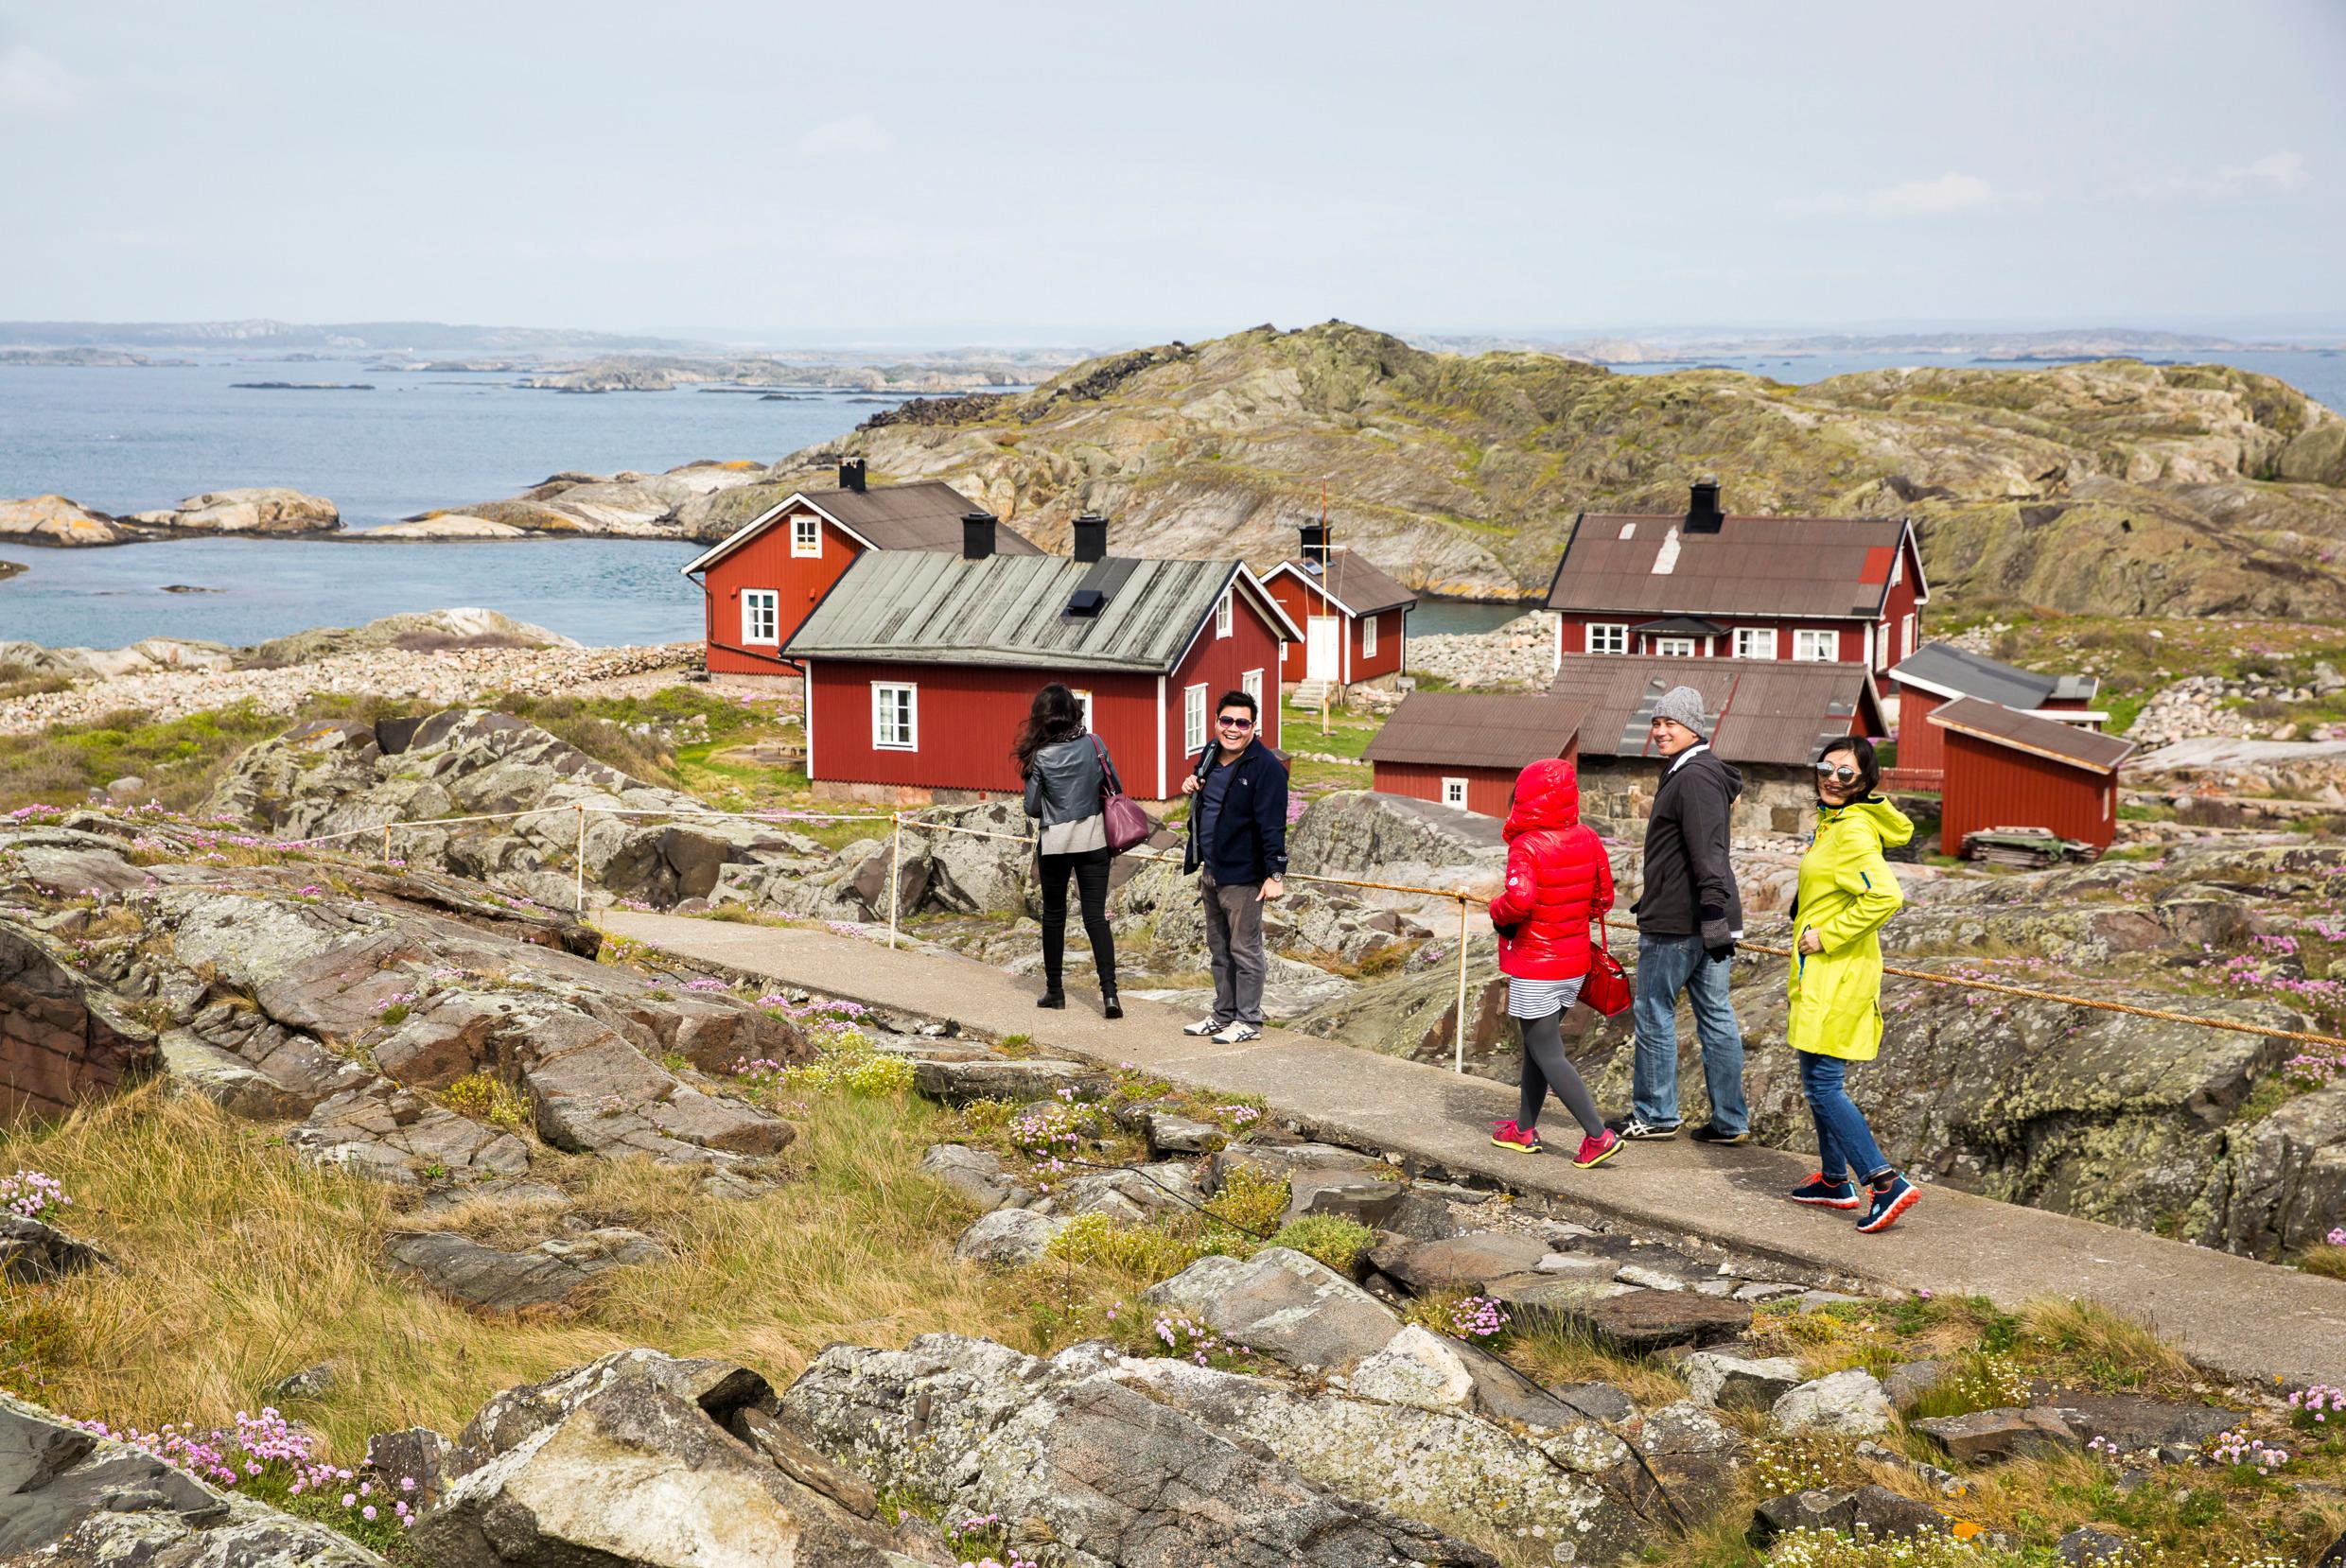 A group of people walk through the rocky island landscape of Kosterhavet National Park, passing a few small red houses.